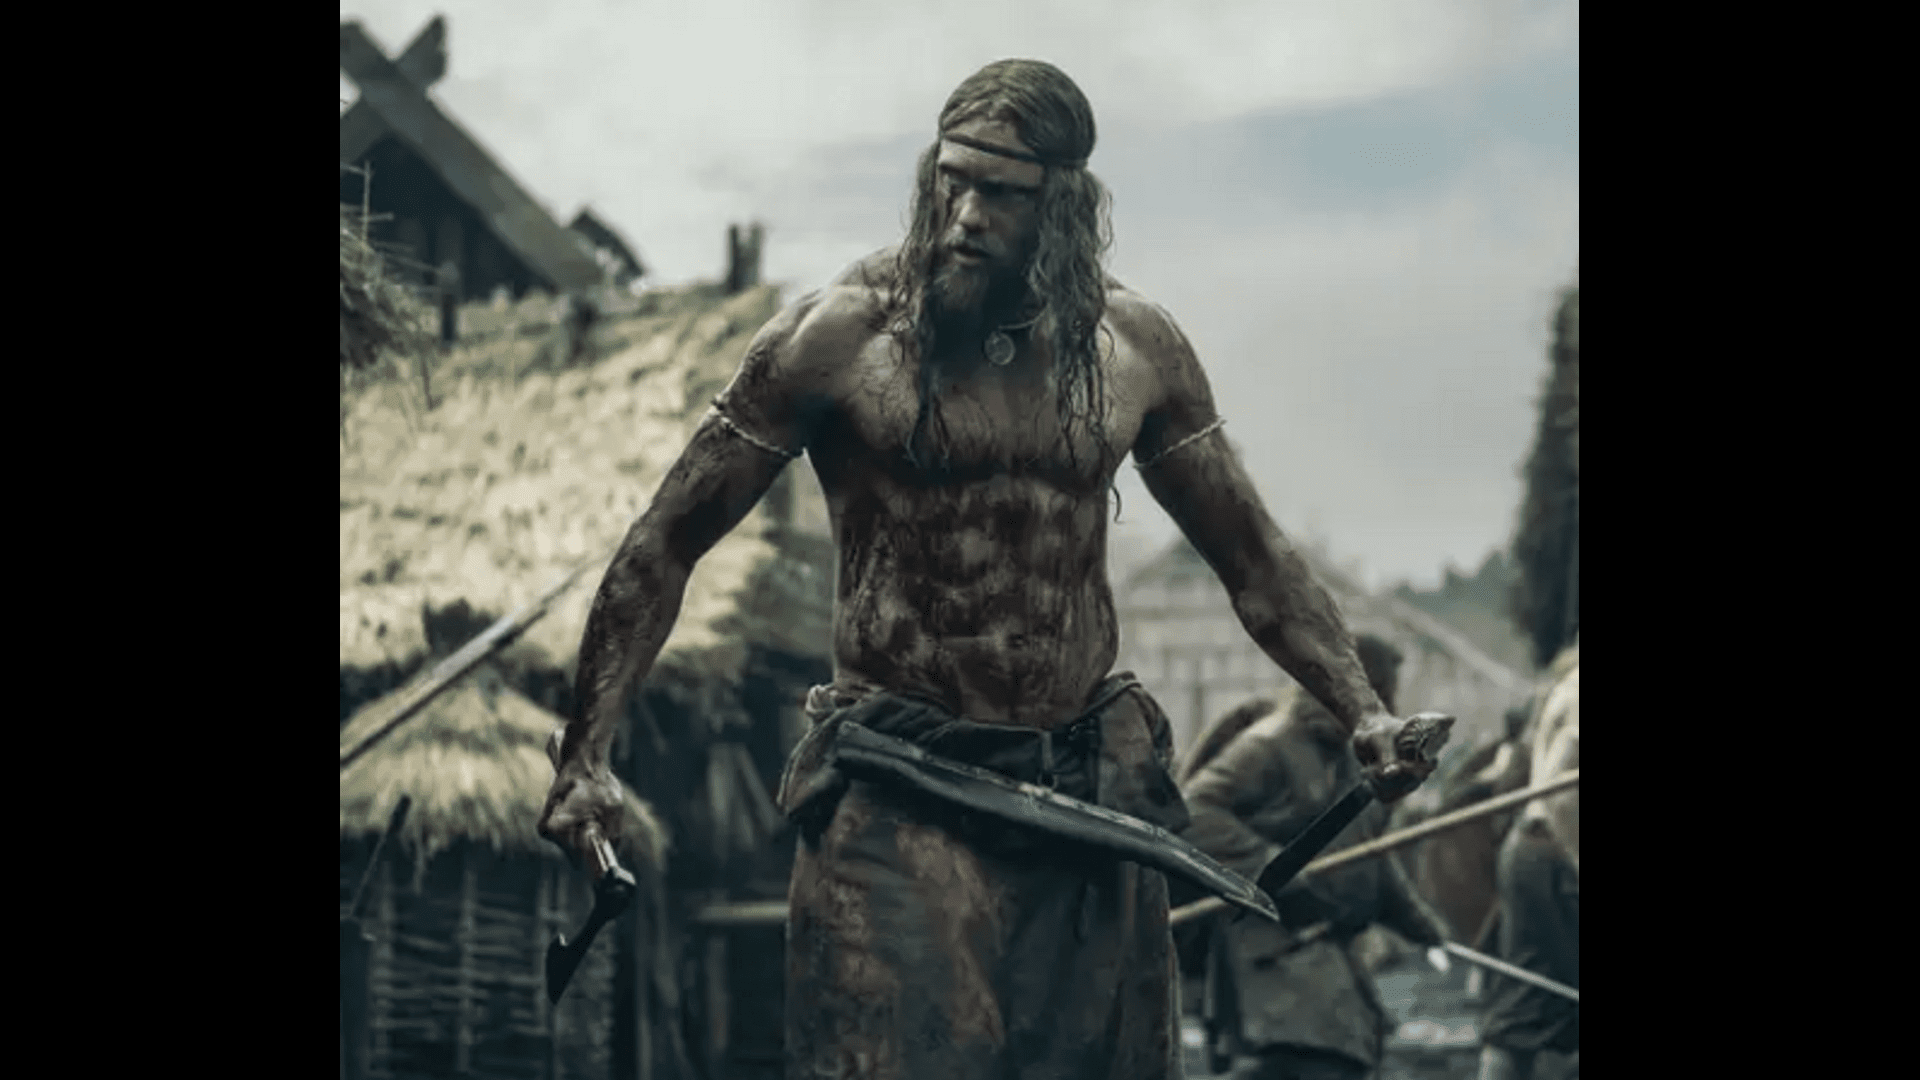 ”alexander-skarsgard-gained-9-kilograms-for-the-role-of-a-viking-in-the-film-northman”